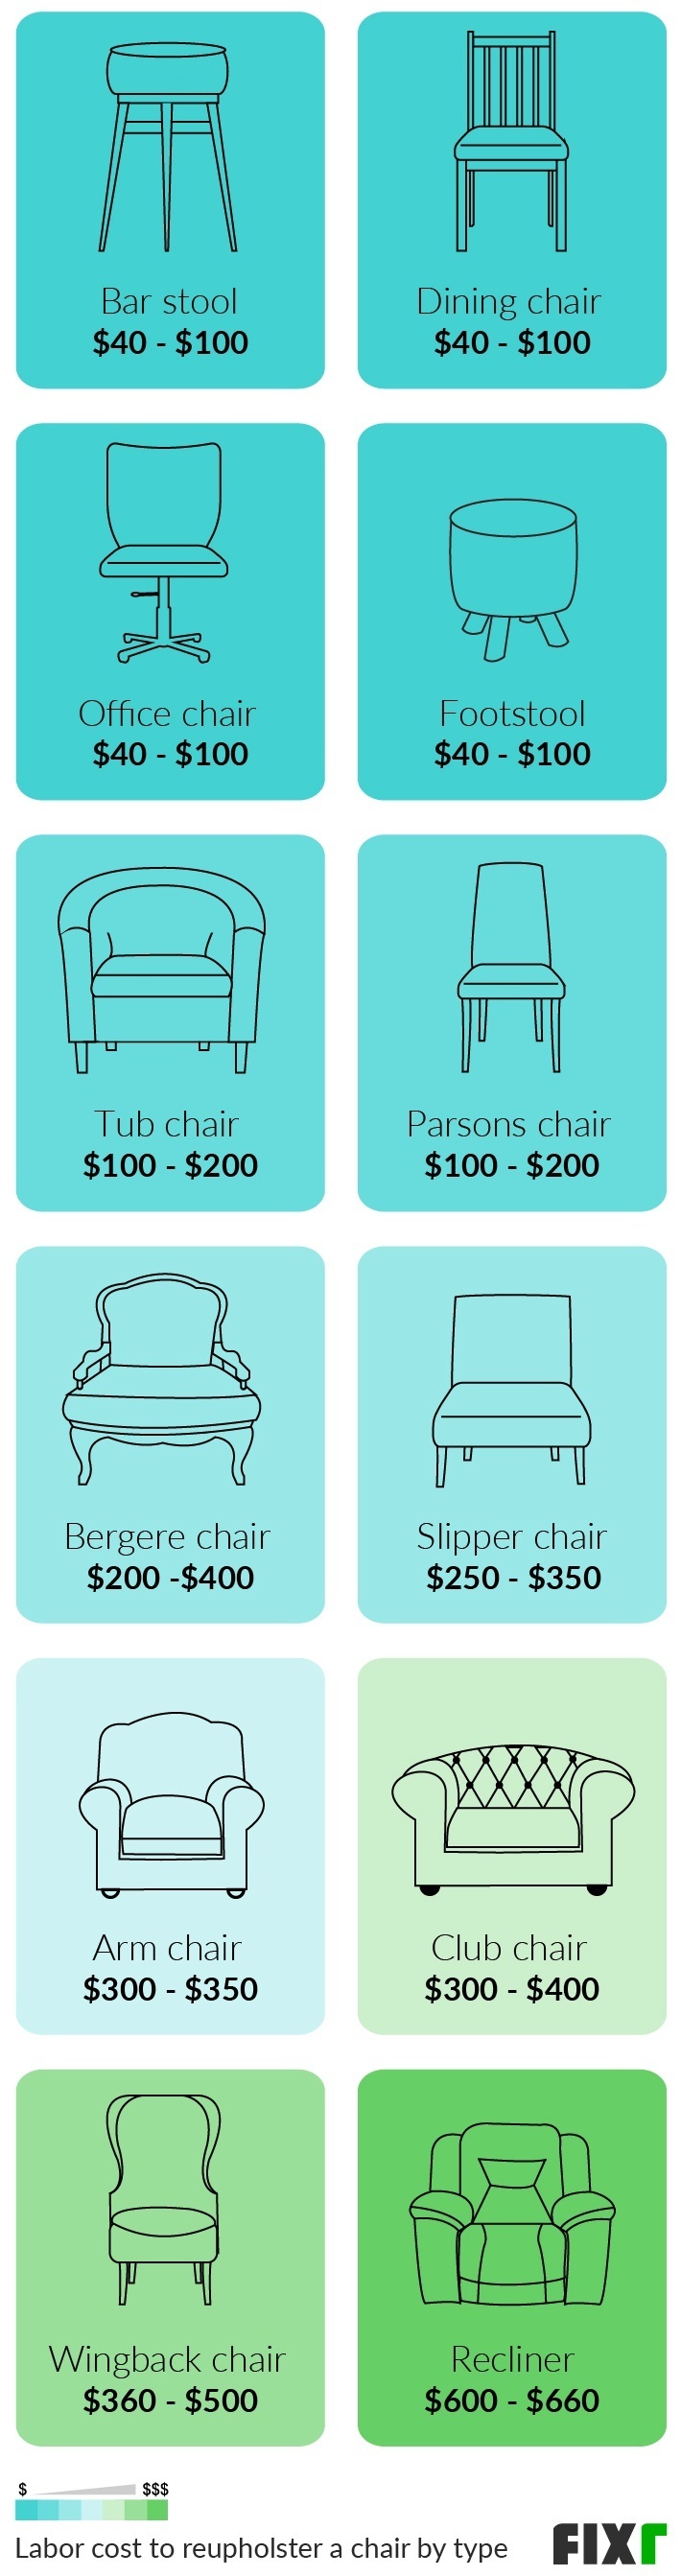 2021 Cost To Reupholster A Chair, How Much Does It Cost To Reupholster A Leather Recliner